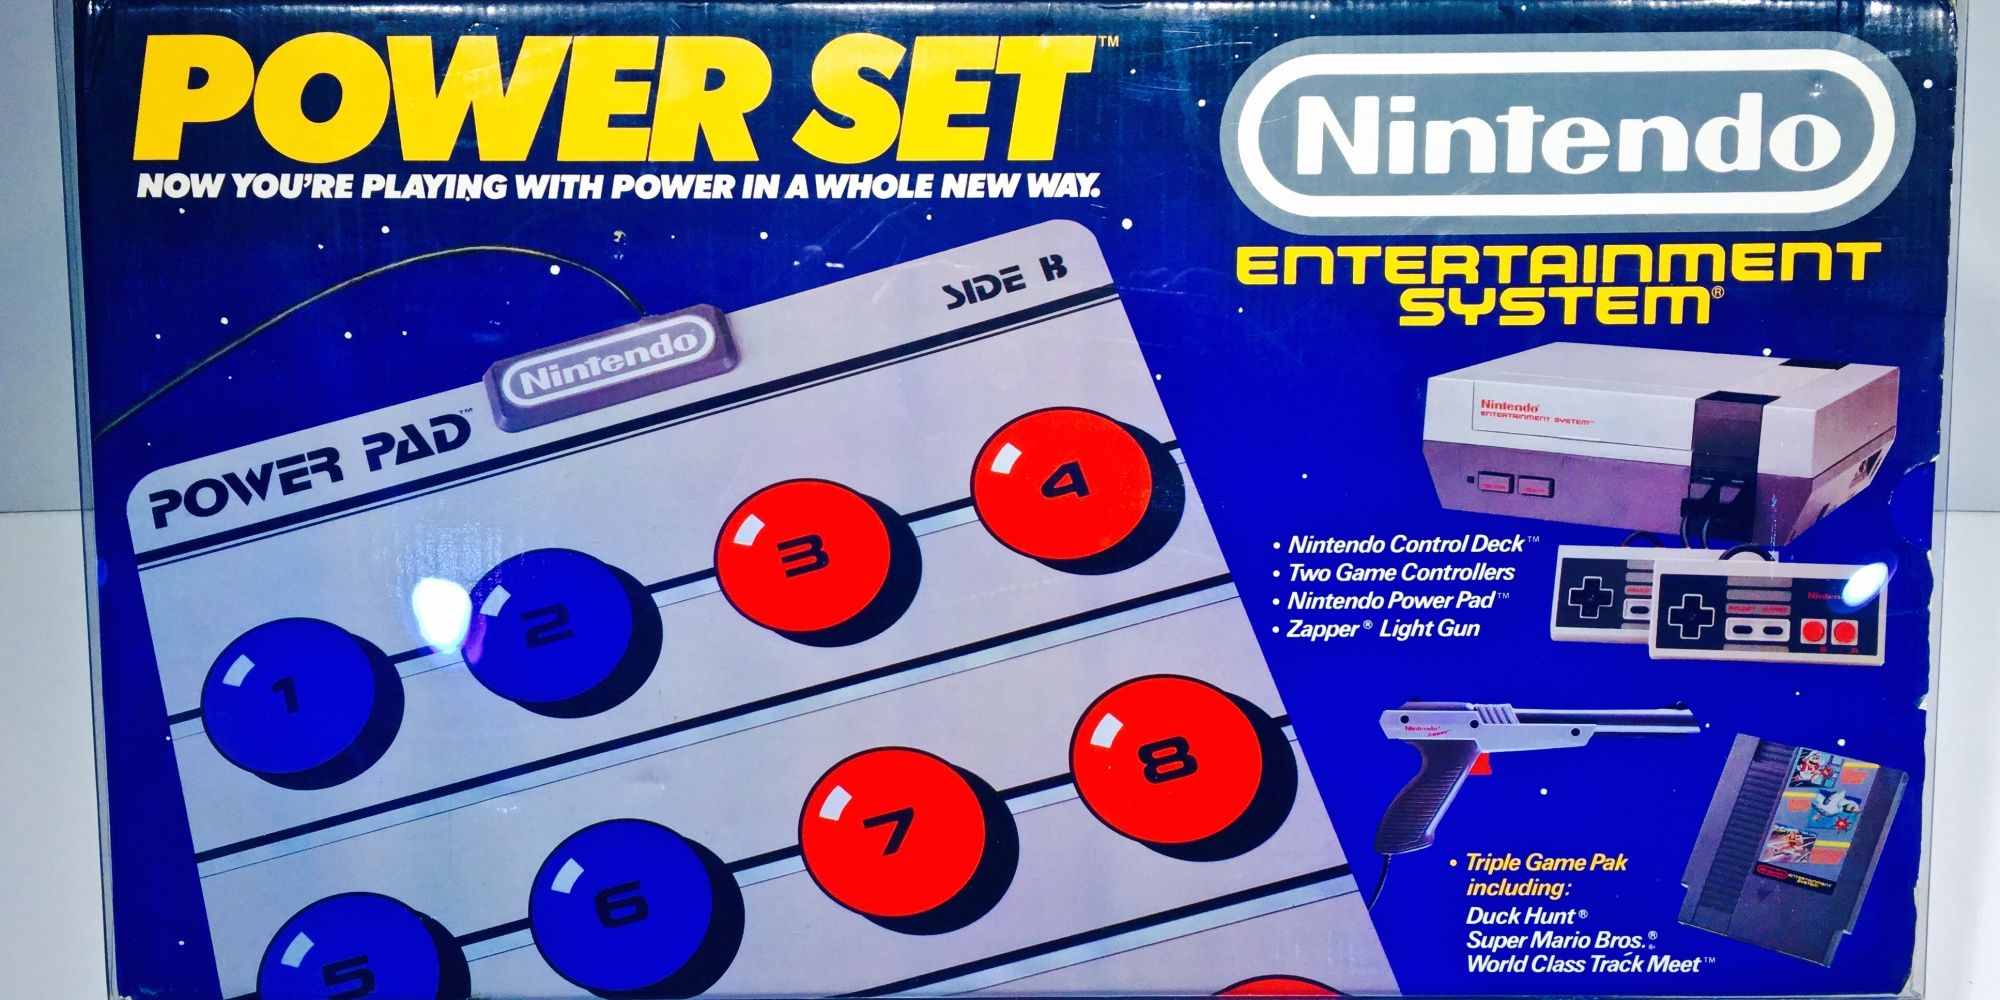 Nintendo Power Pack Box NES Zapper and Power Pad